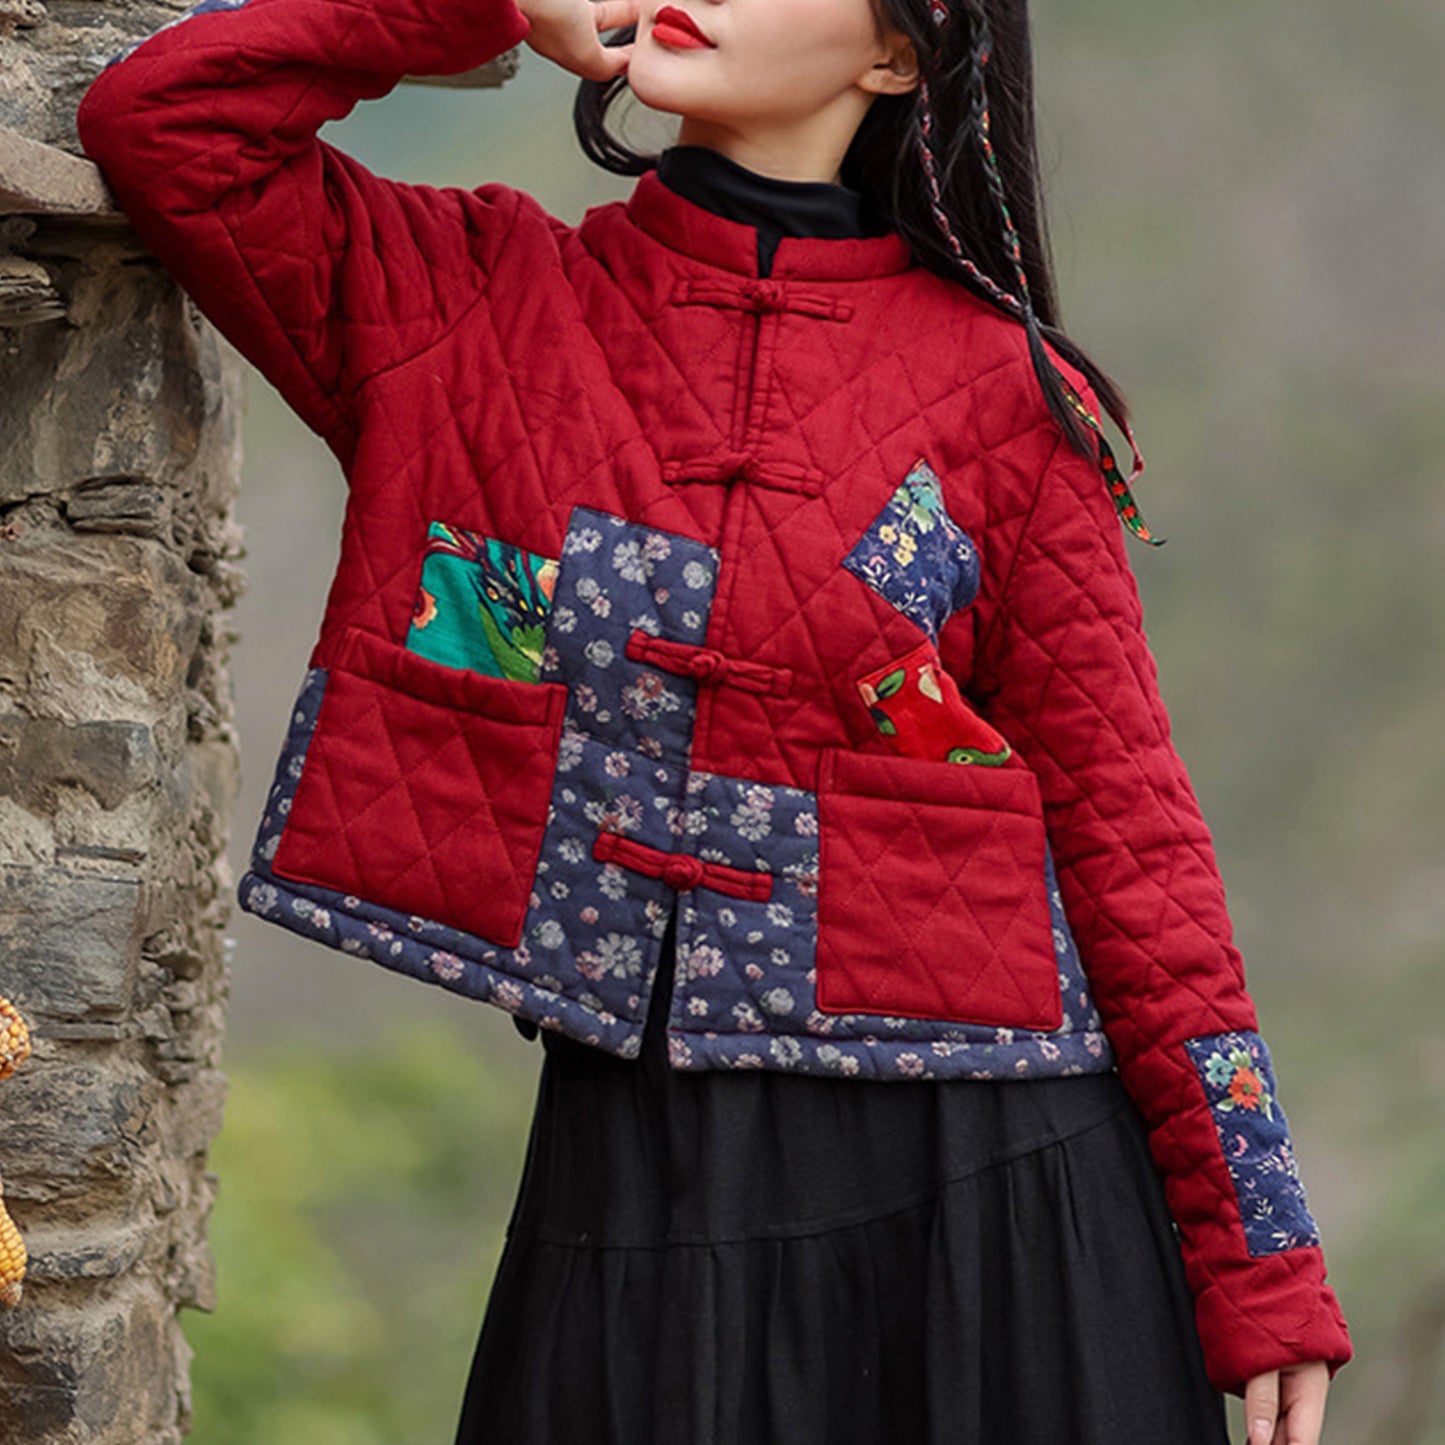 Retro Patchwork Quilted Jacket